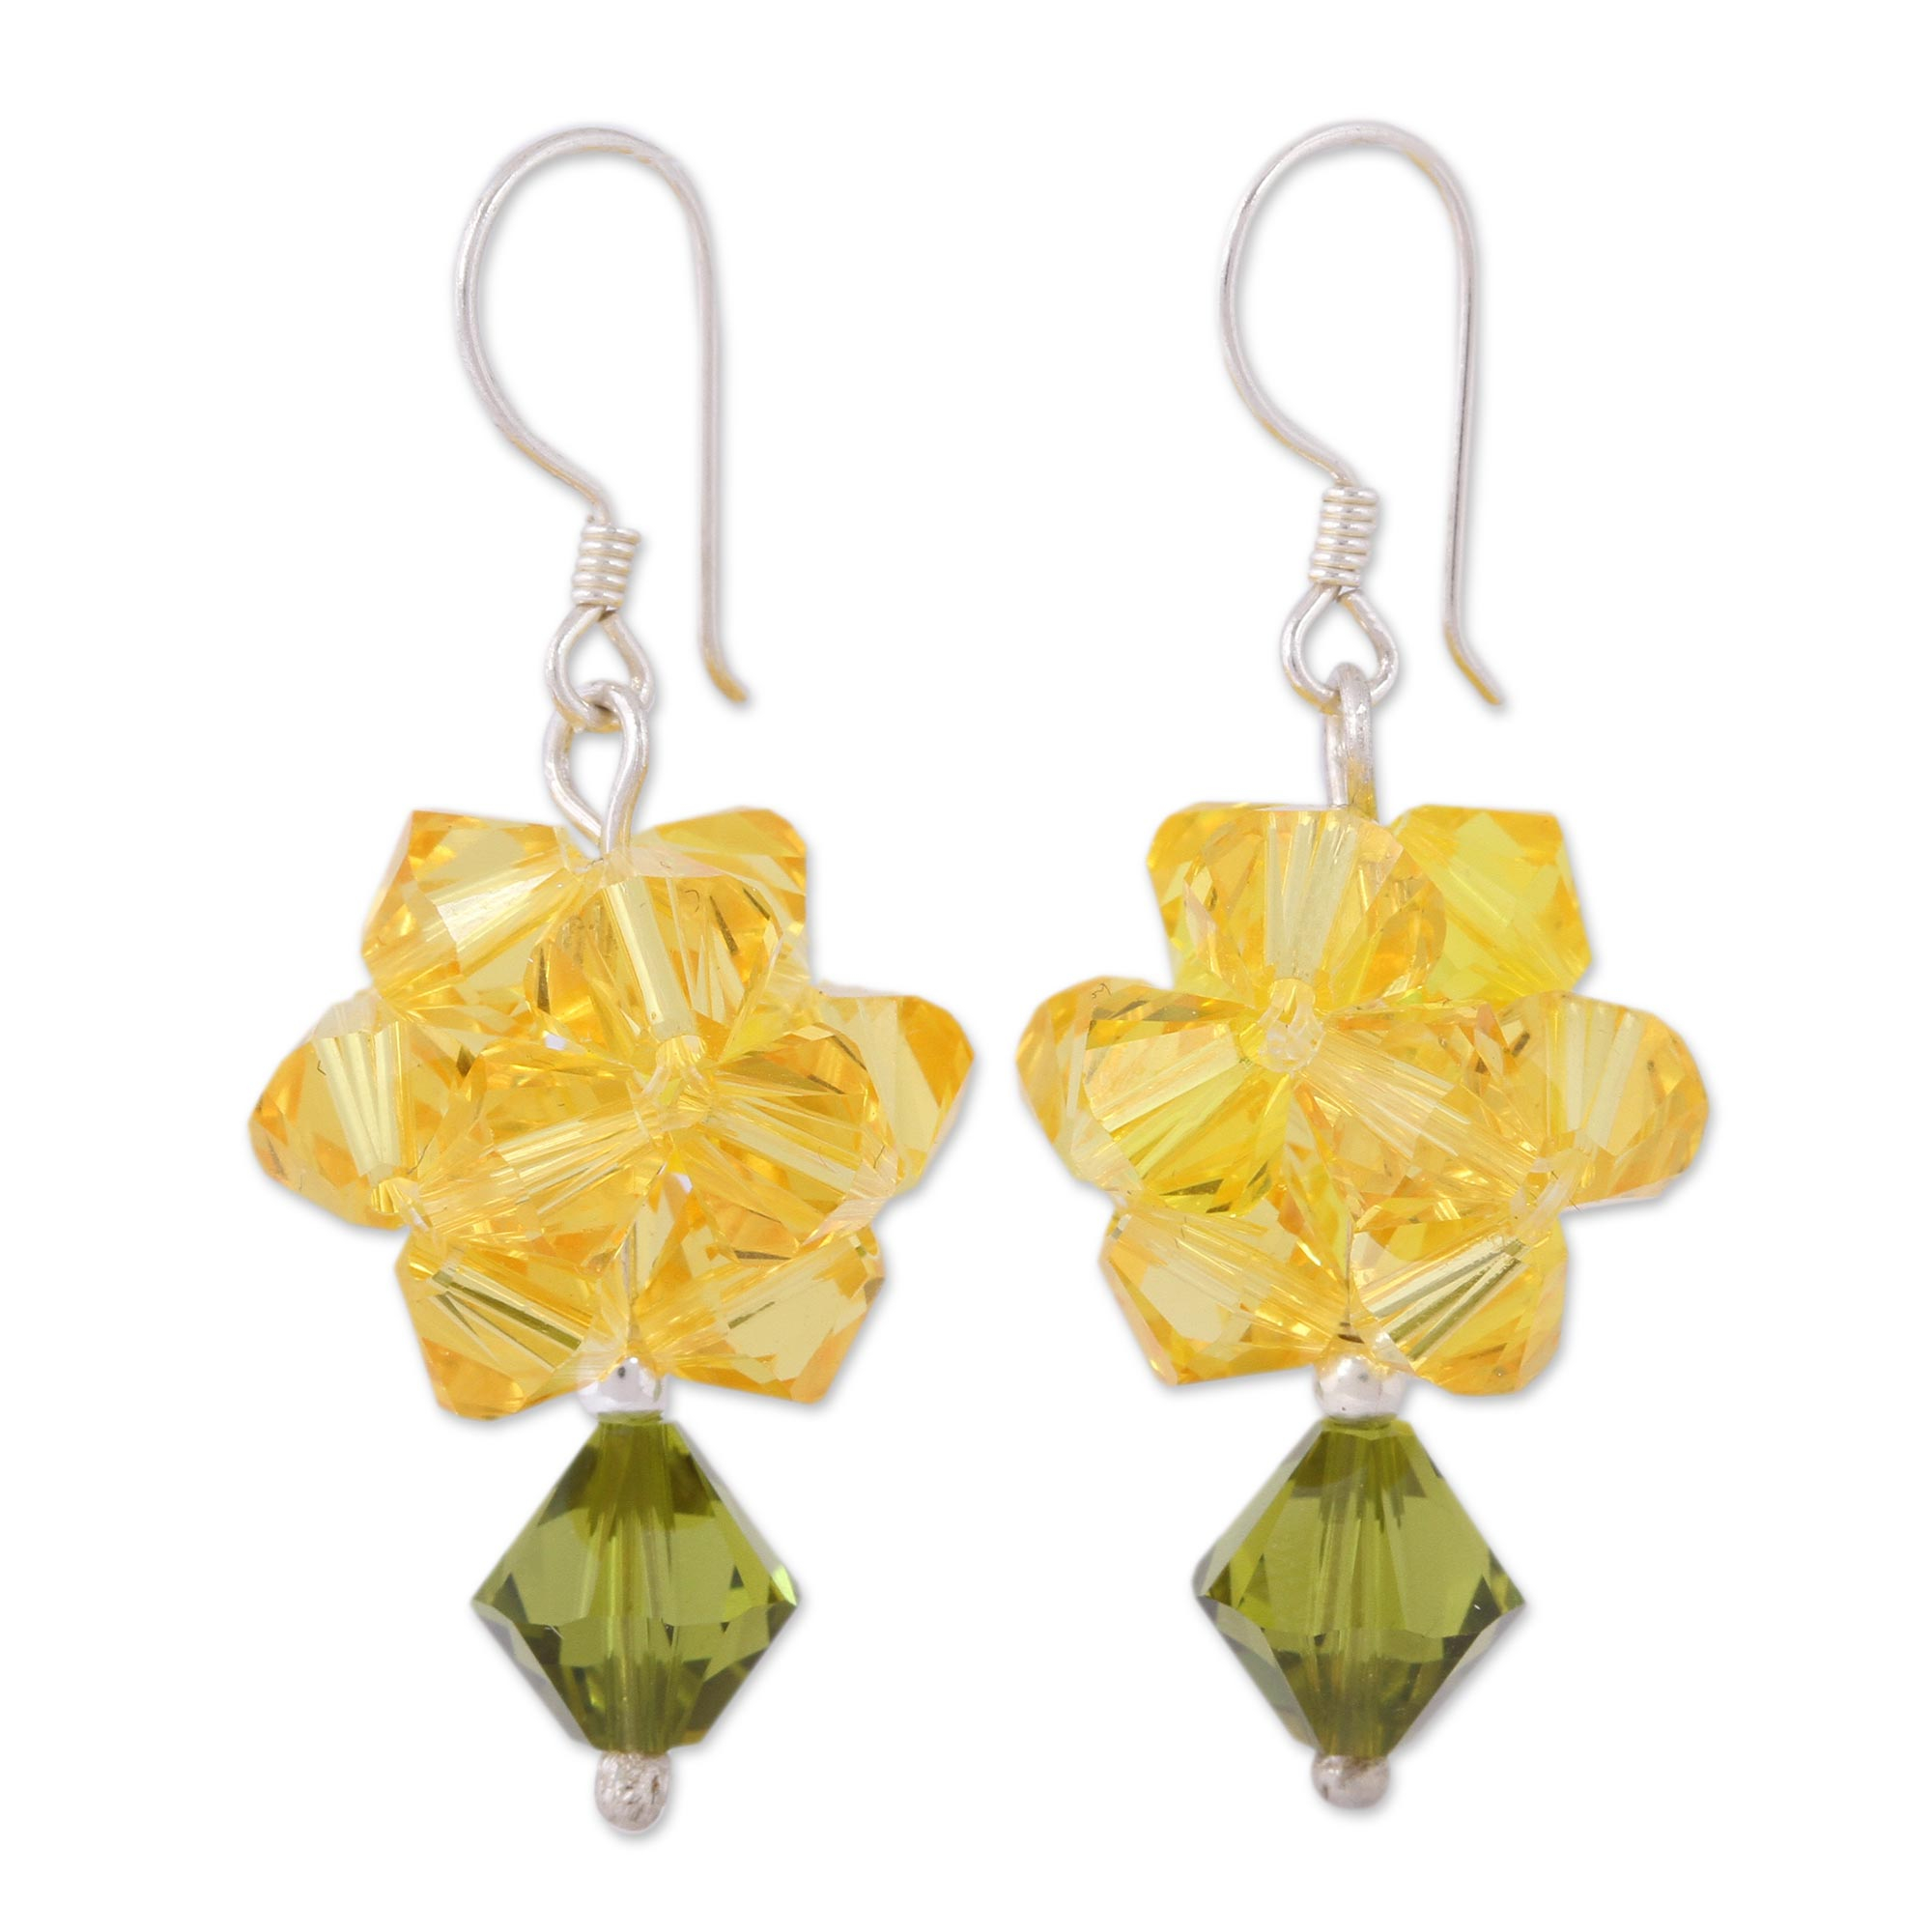 Dom Orthodox knijpen UNICEF Market | Yellow Swarovski Crystal Dangle Earrings from Mexico -  Shooting Stars in Yellow